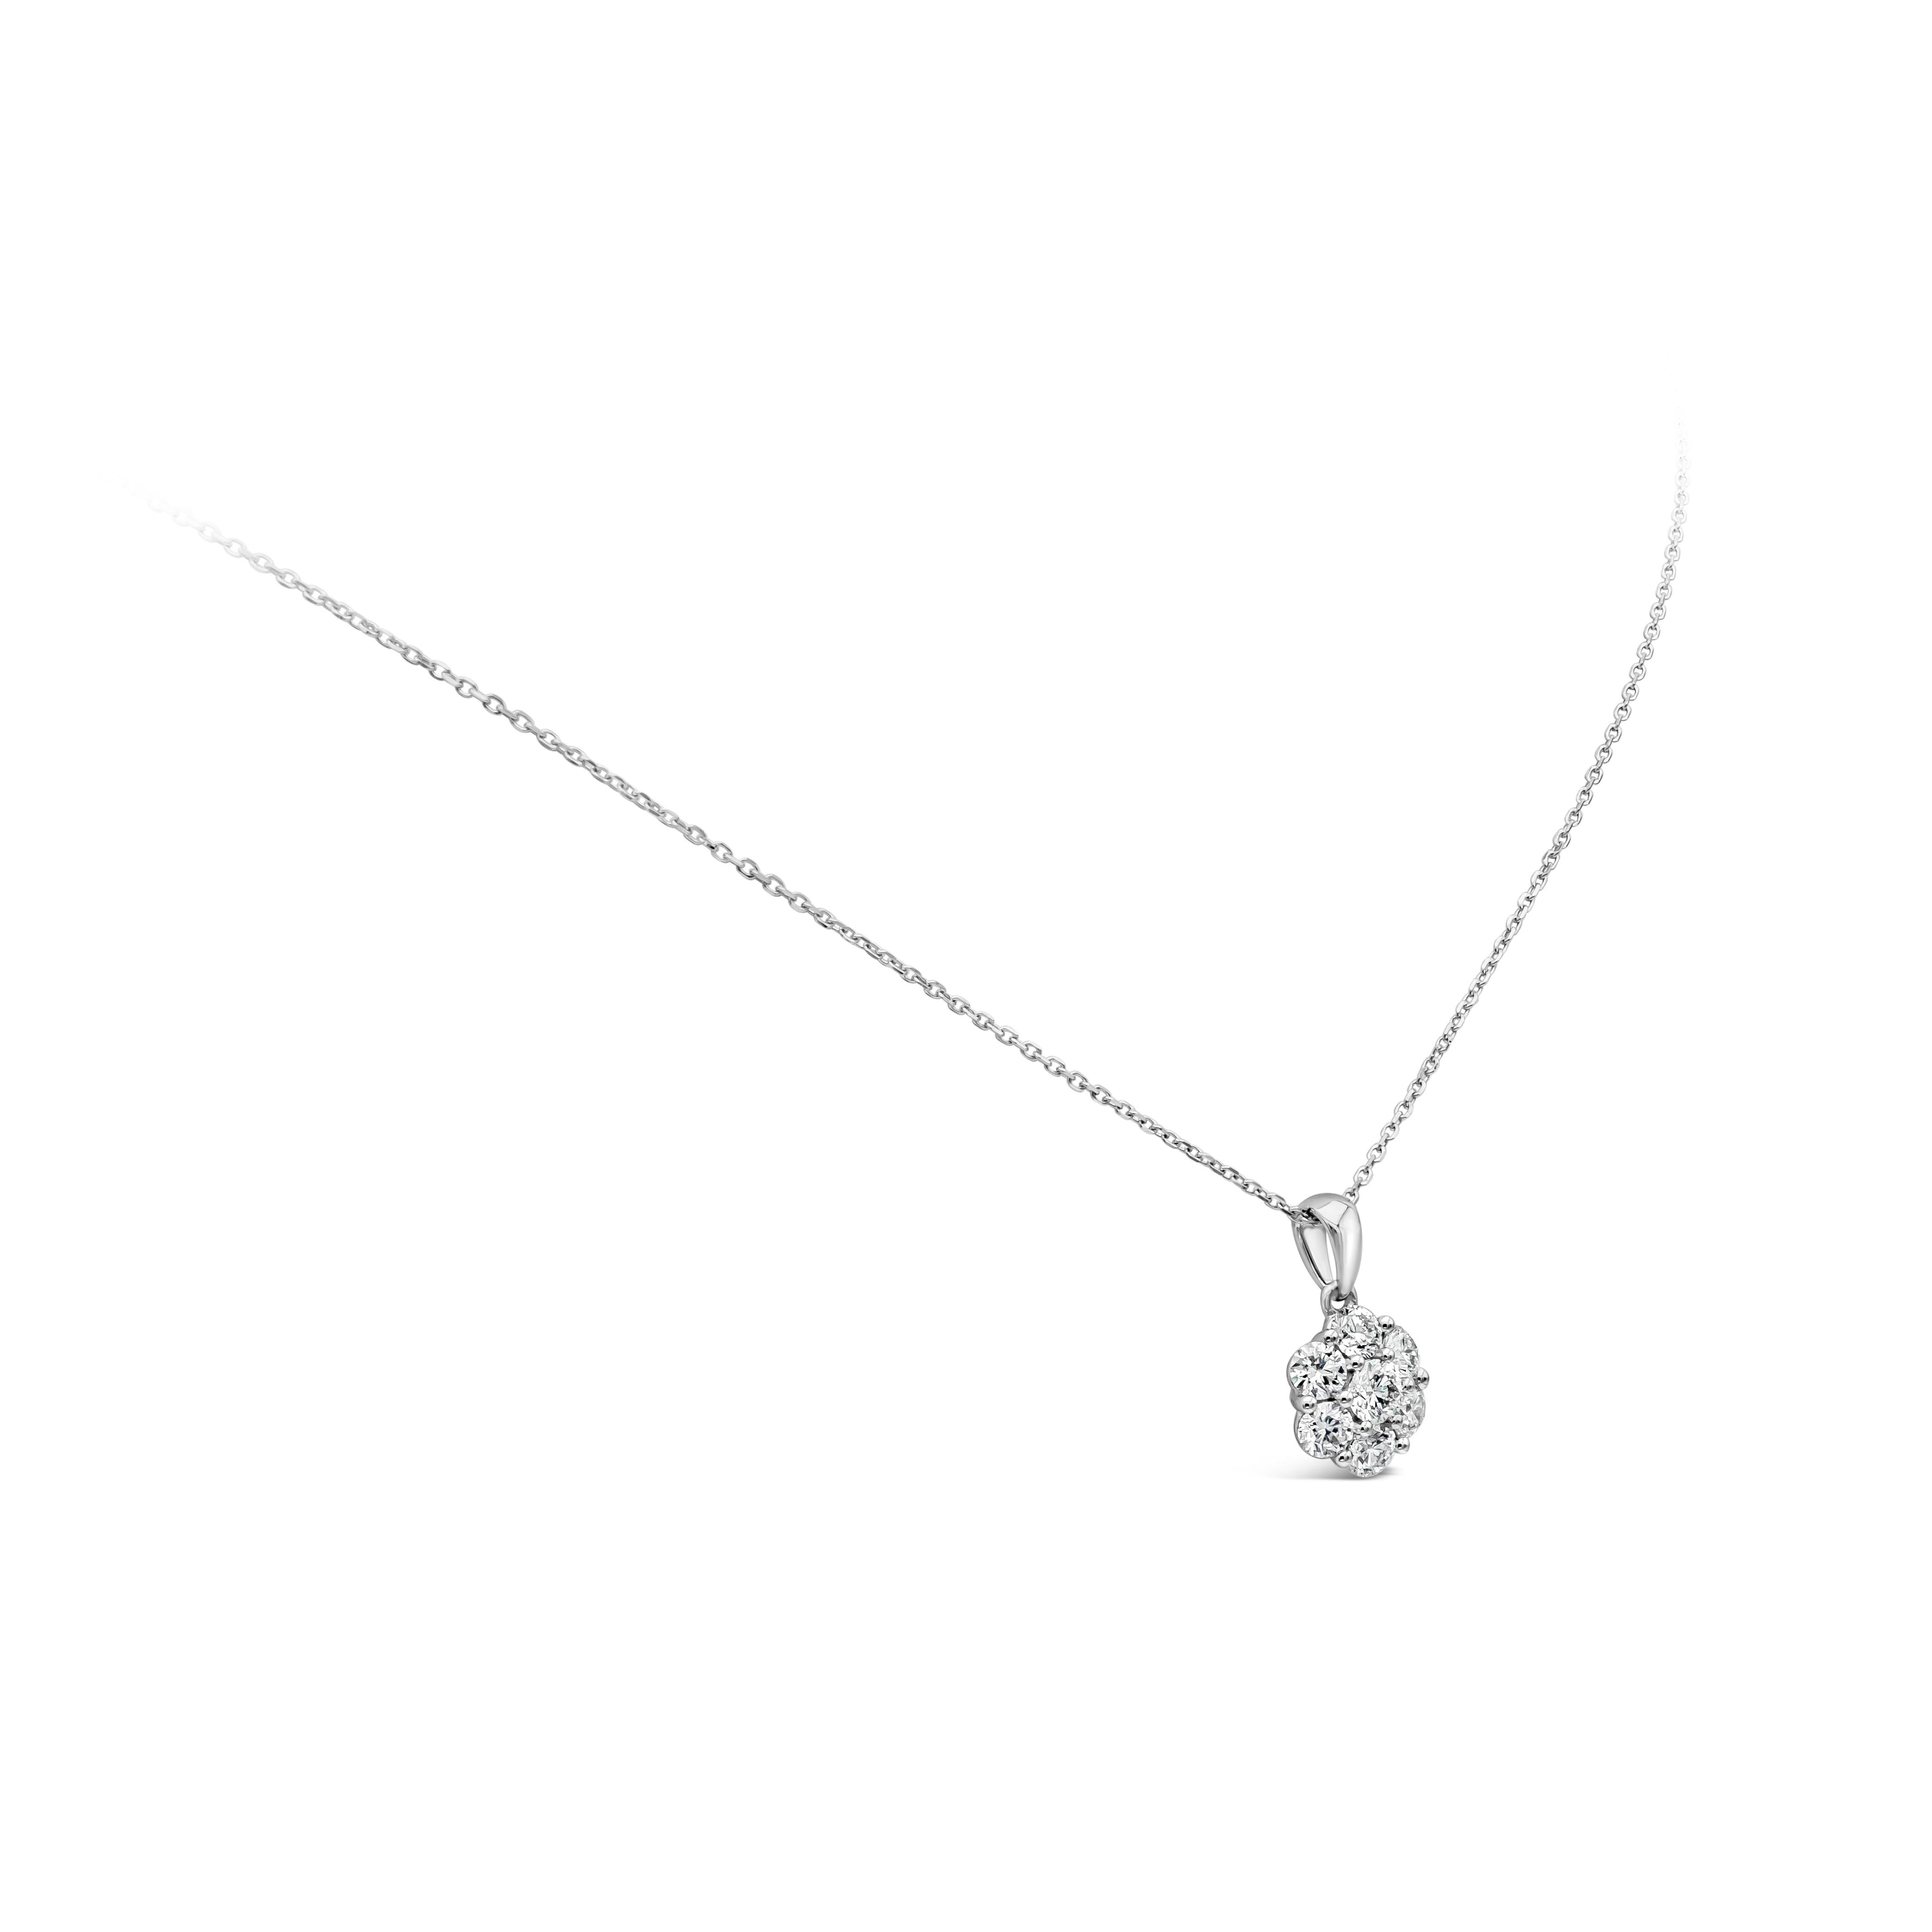 A simple yet beautiful pendant necklace showcasing a cluster of 7 brilliant round diamonds, arranged in a flower design made in 18k white gold. Diamonds weigh 1 carats total and are approximately G color, VS-SI clarity. Made in 18k white